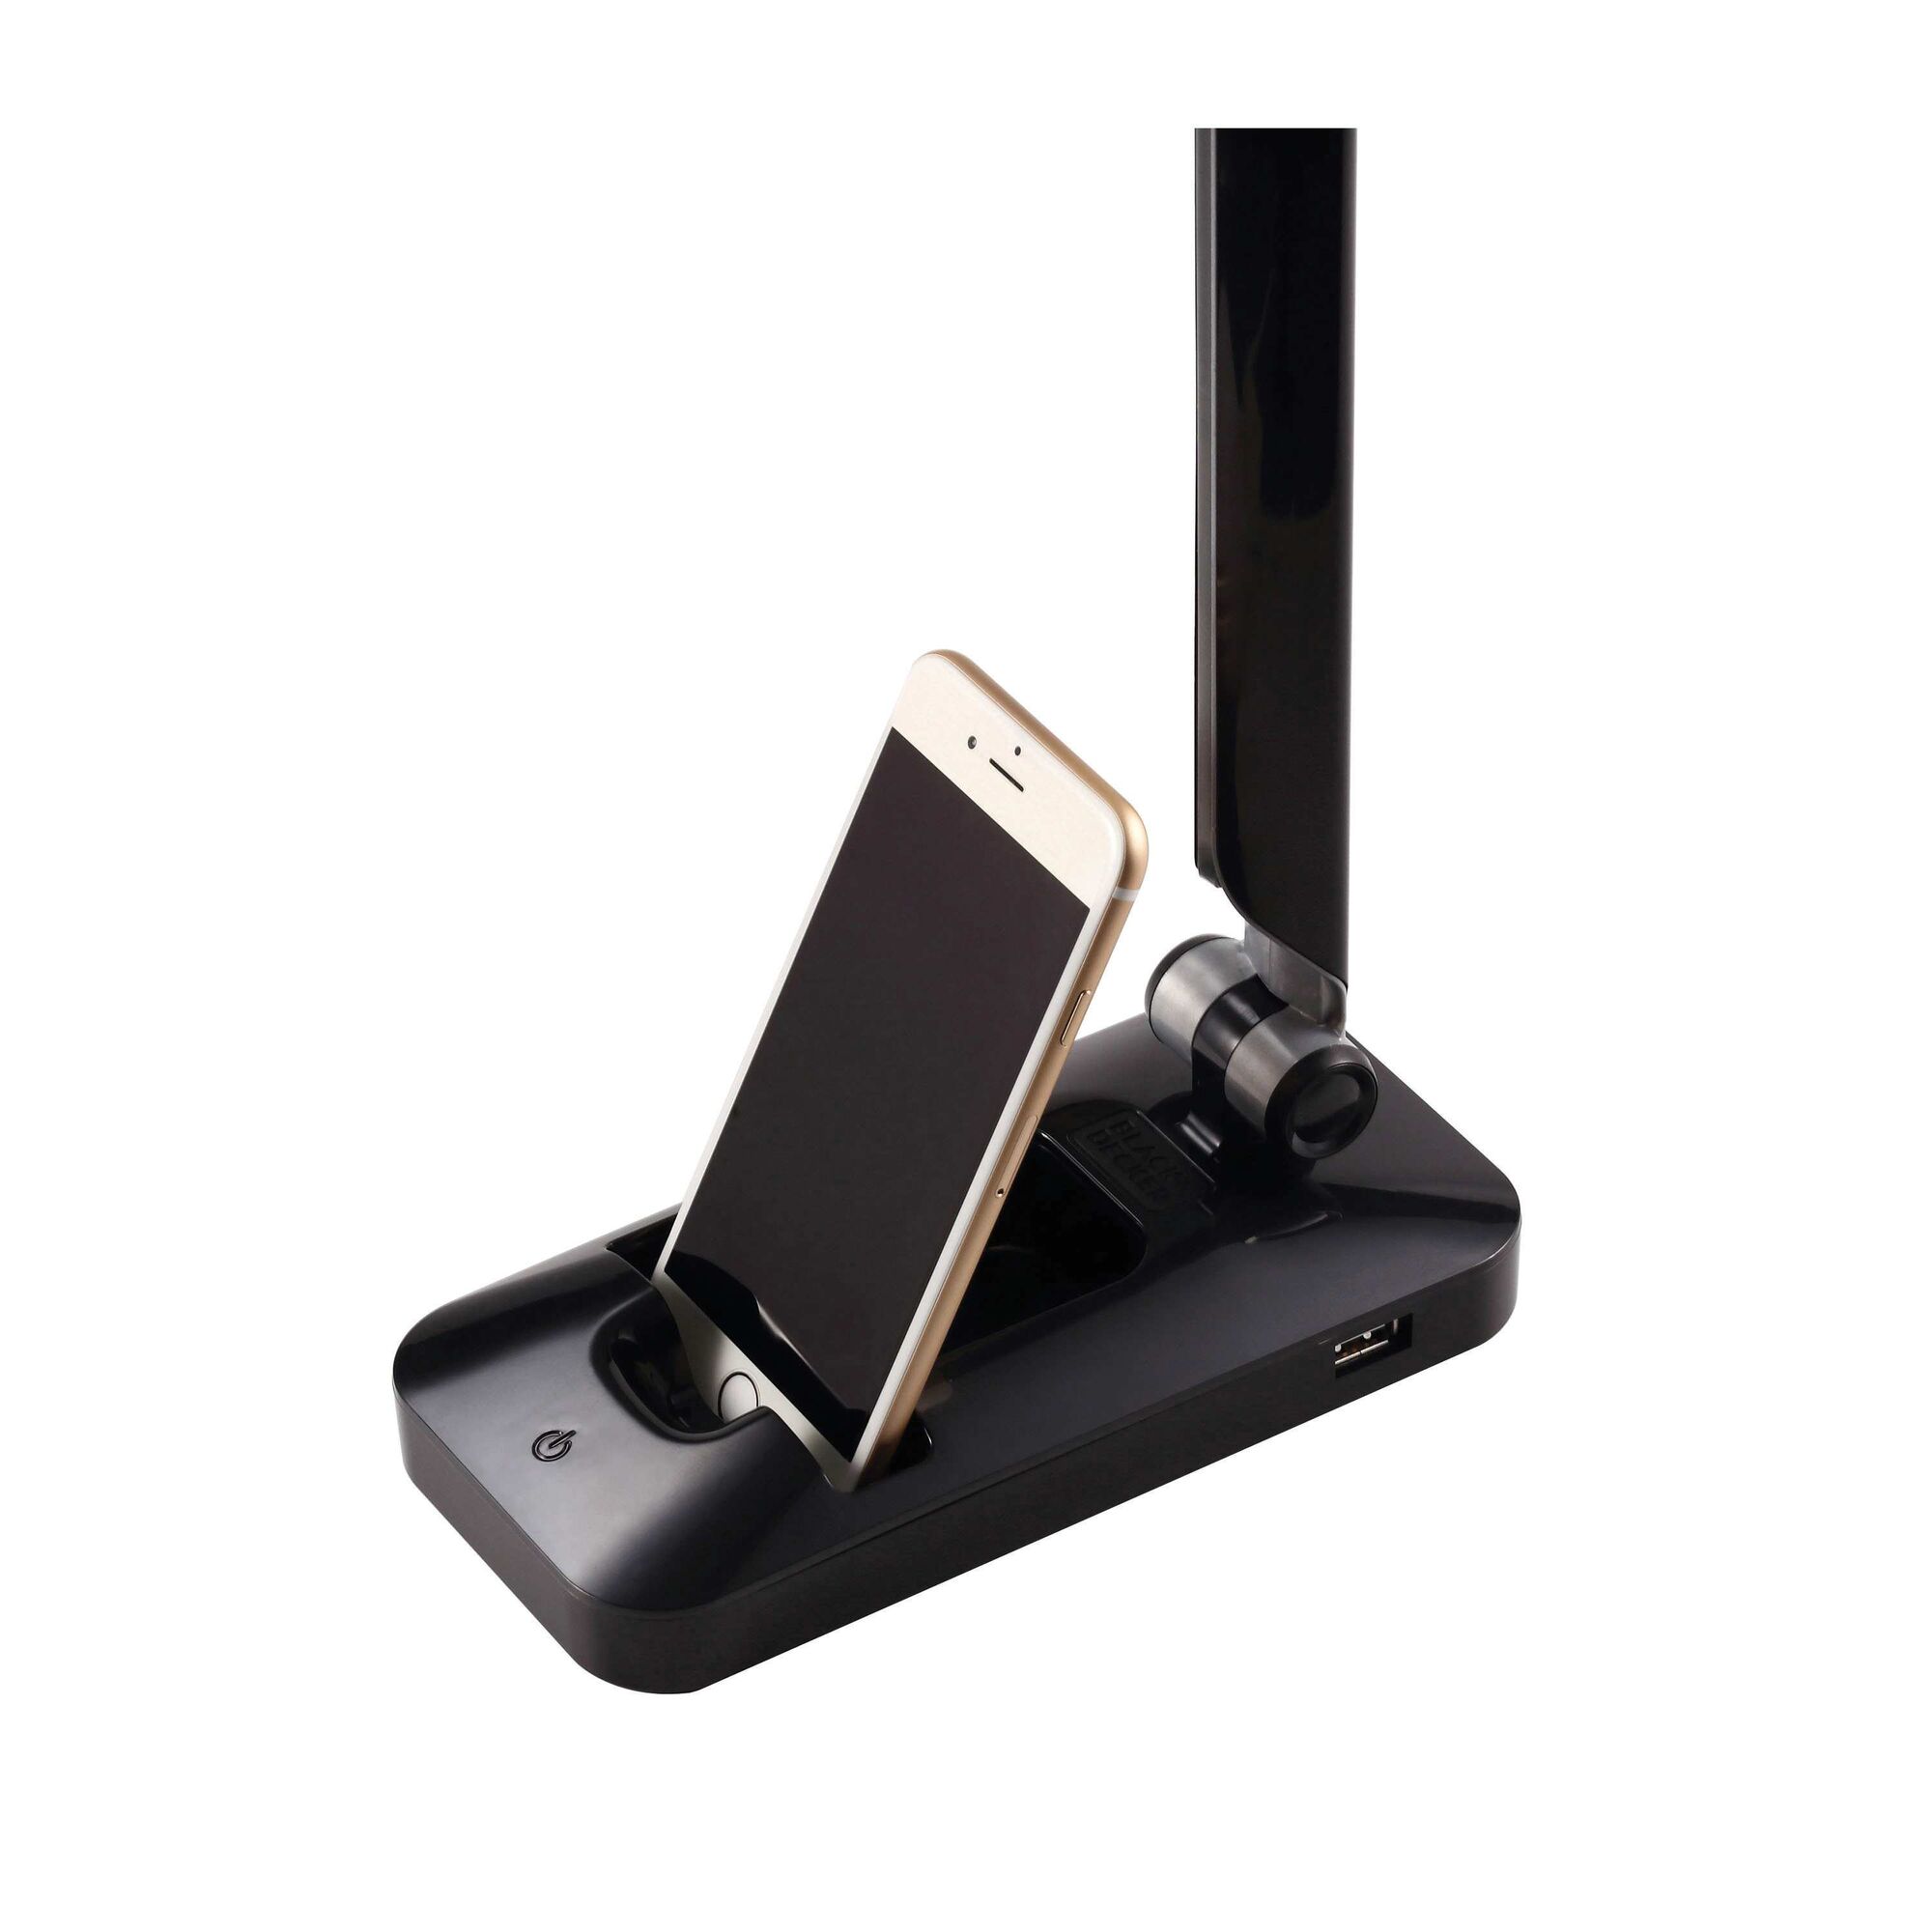 Phone stand at the base of the Verve folding desk lamp